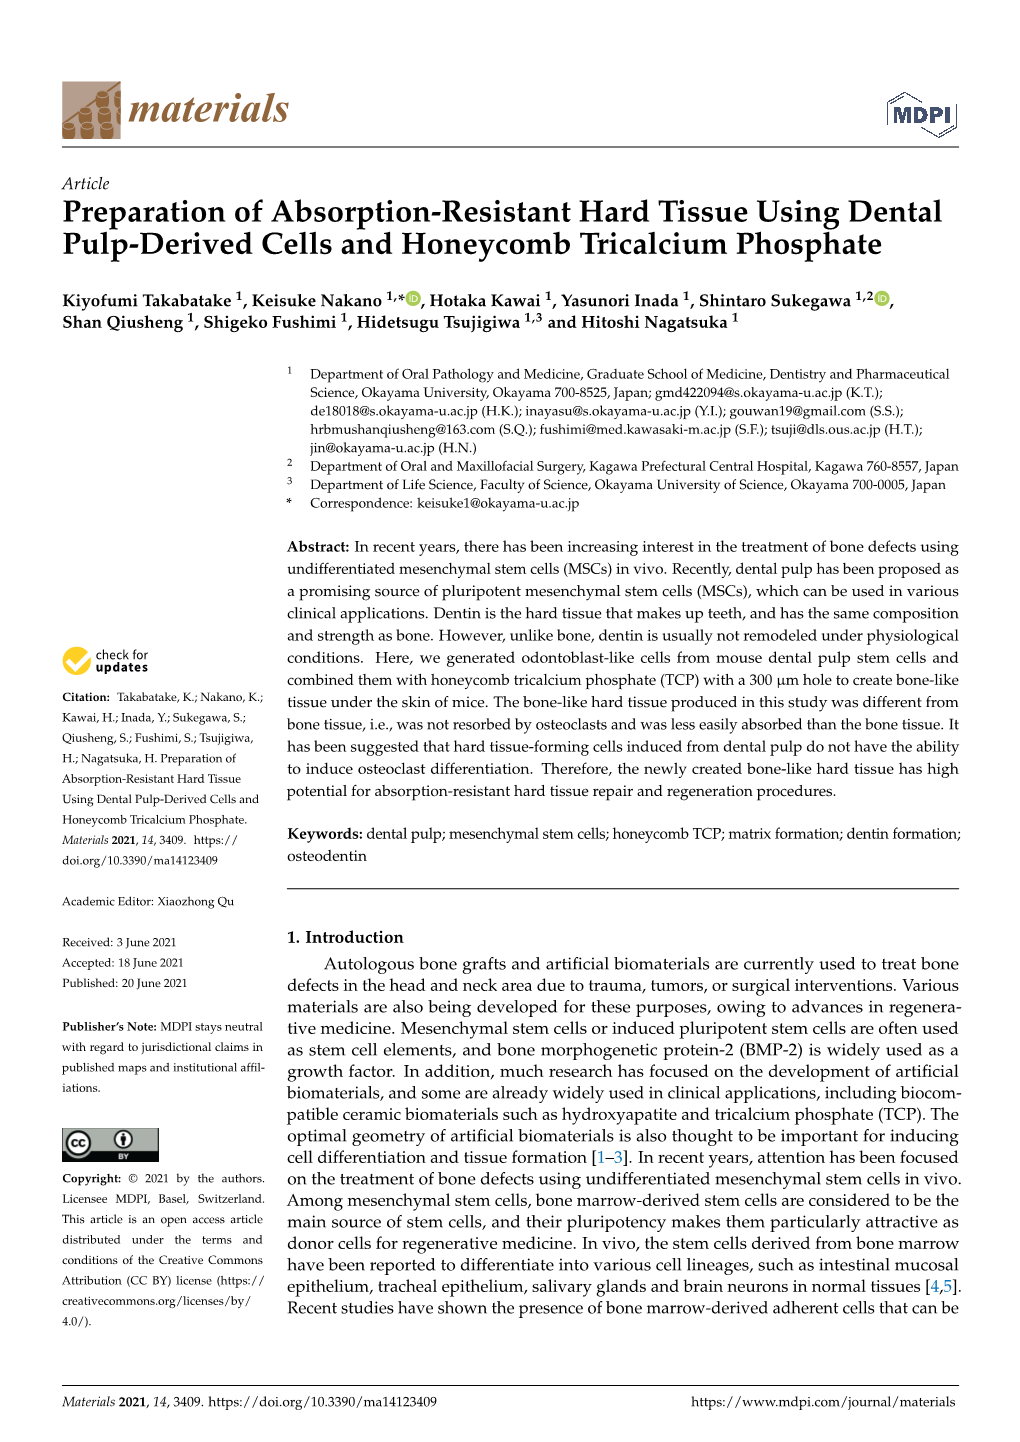 Preparation of Absorption-Resistant Hard Tissue Using Dental Pulp-Derived Cells and Honeycomb Tricalcium Phosphate